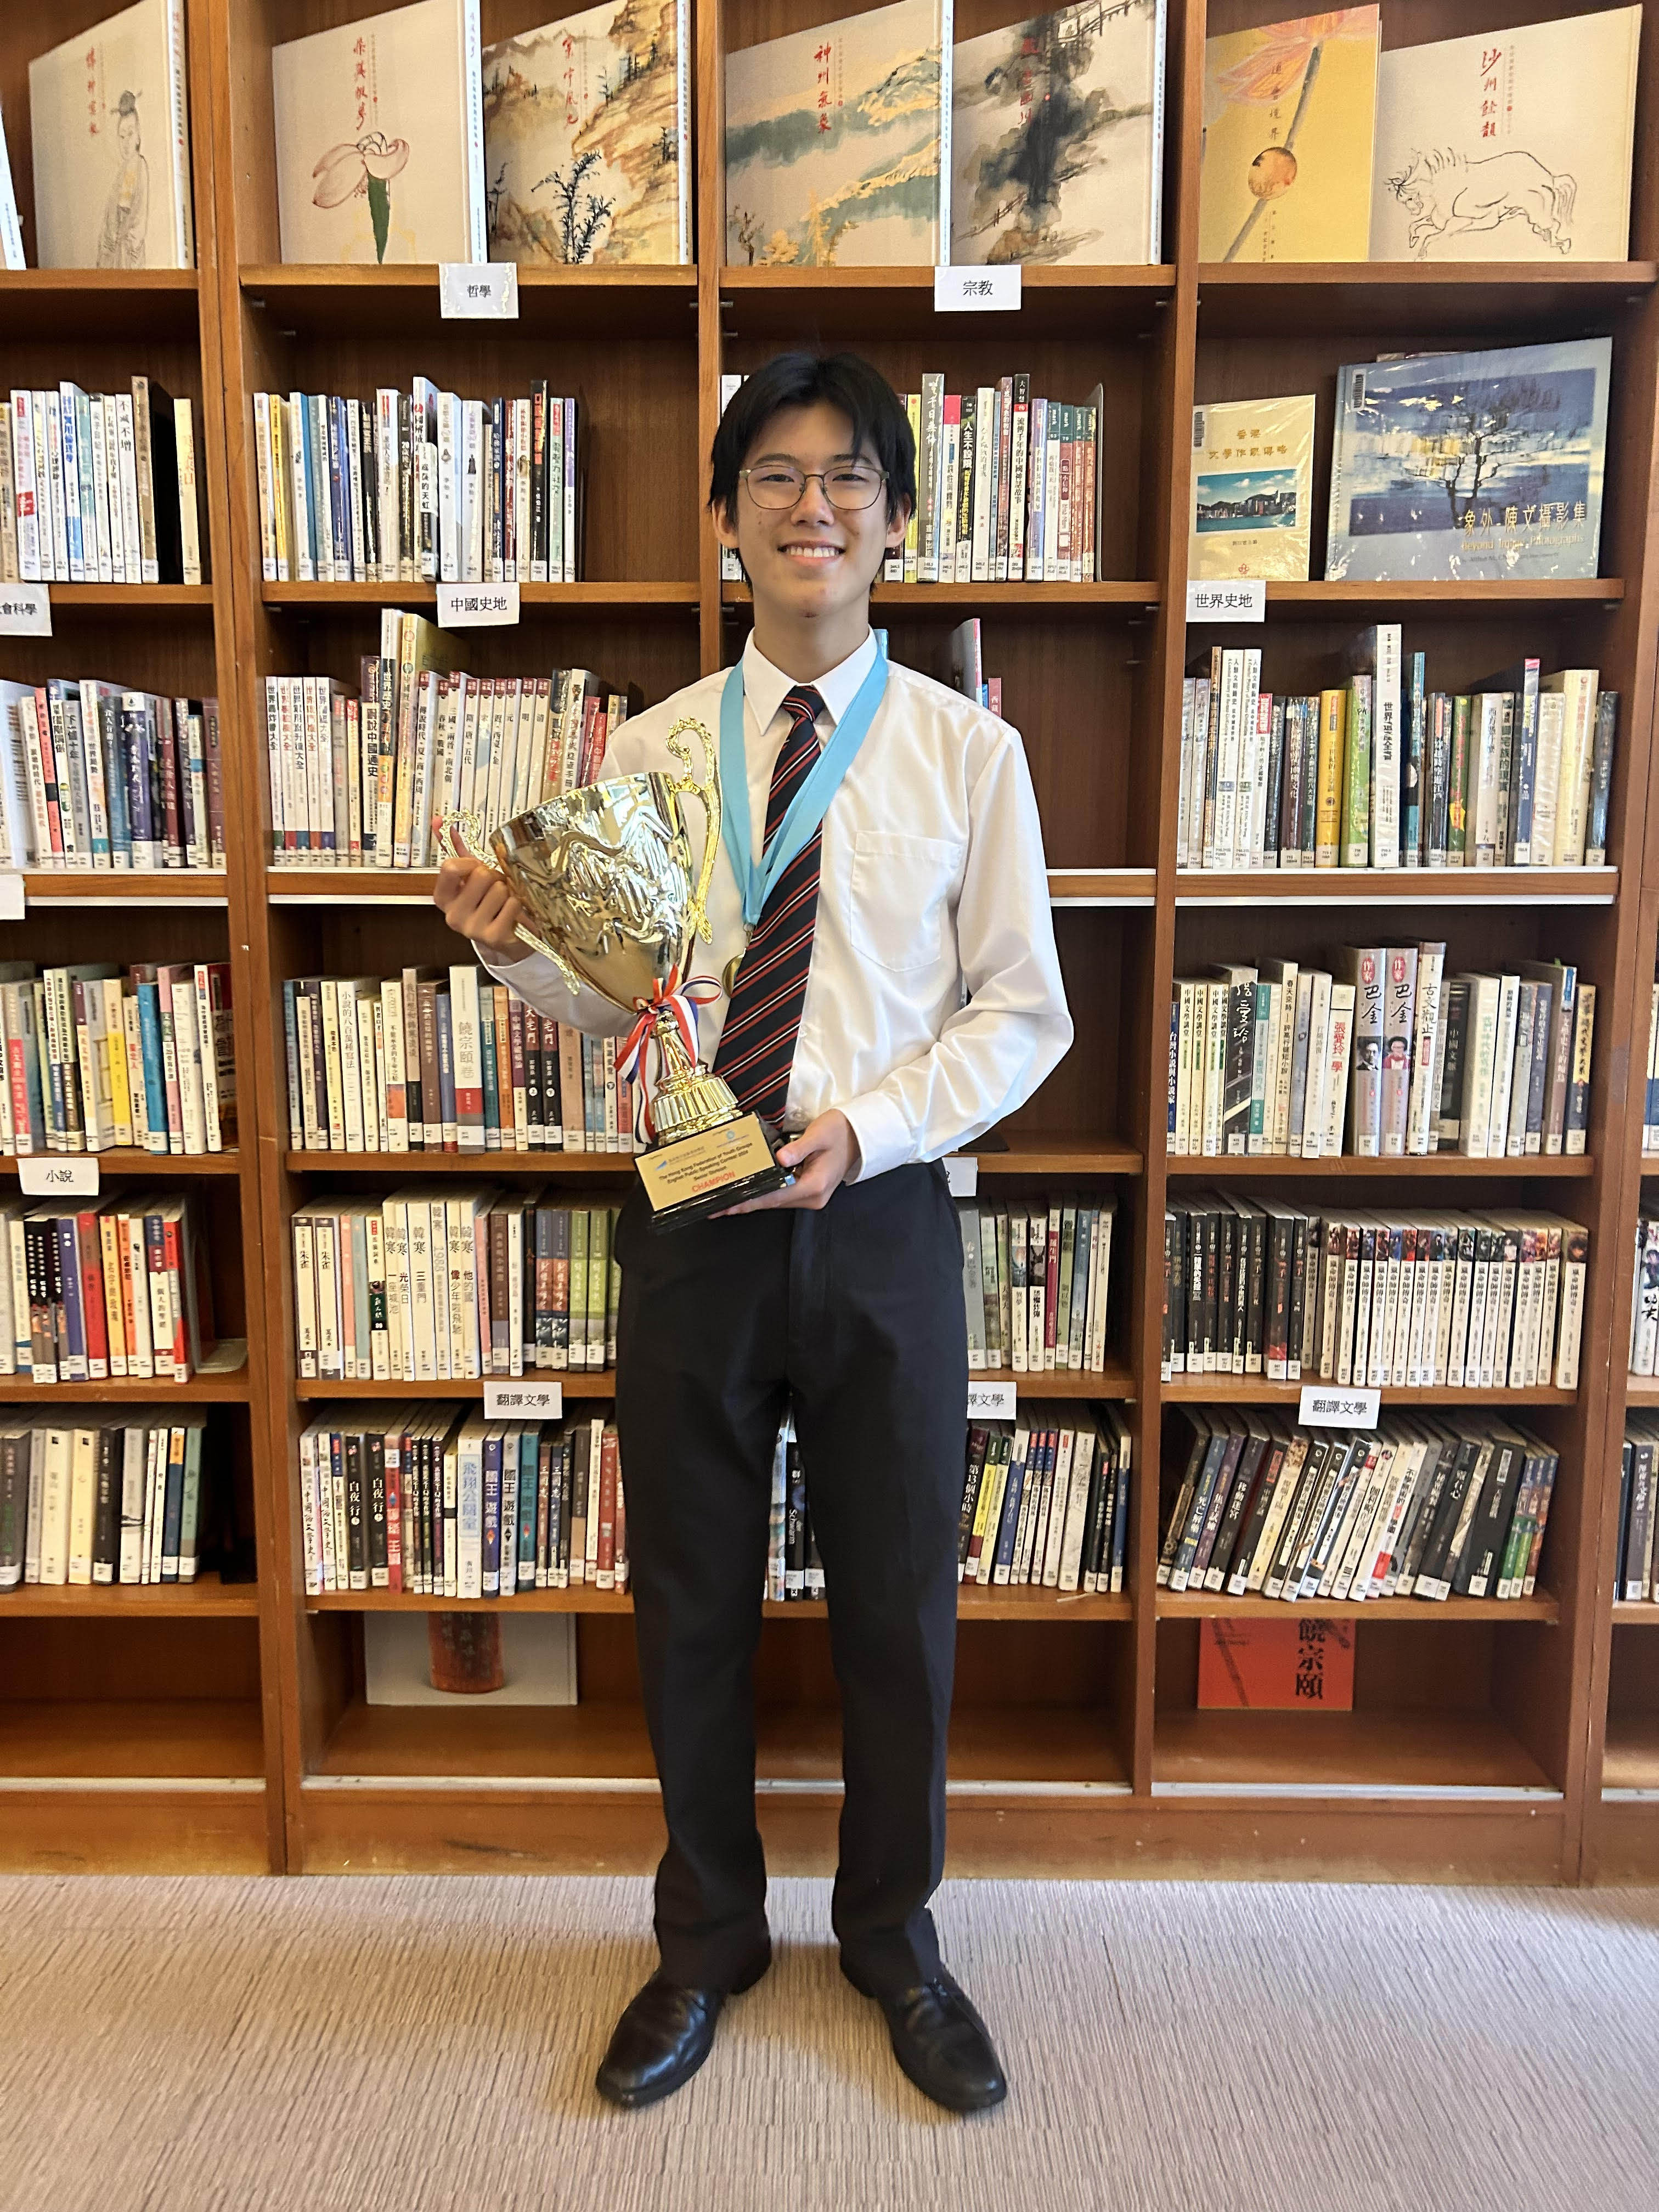 Benjamin Wu poses with his trophy at Diocesan Boys’ School. Photo: Kathryn Giordano